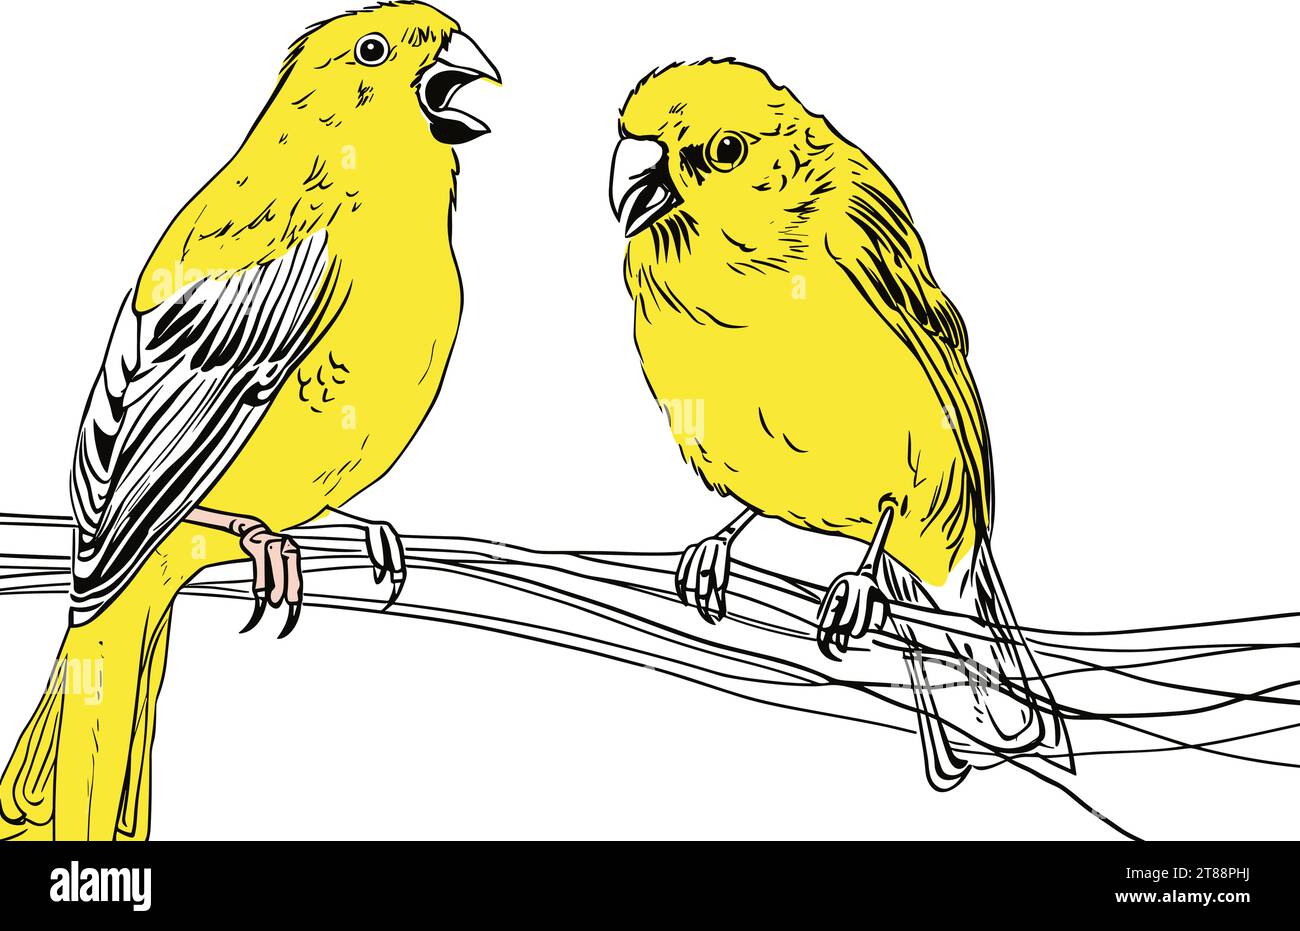 Two Birds On A Branch - A canary listen to a partner. Stock Vector